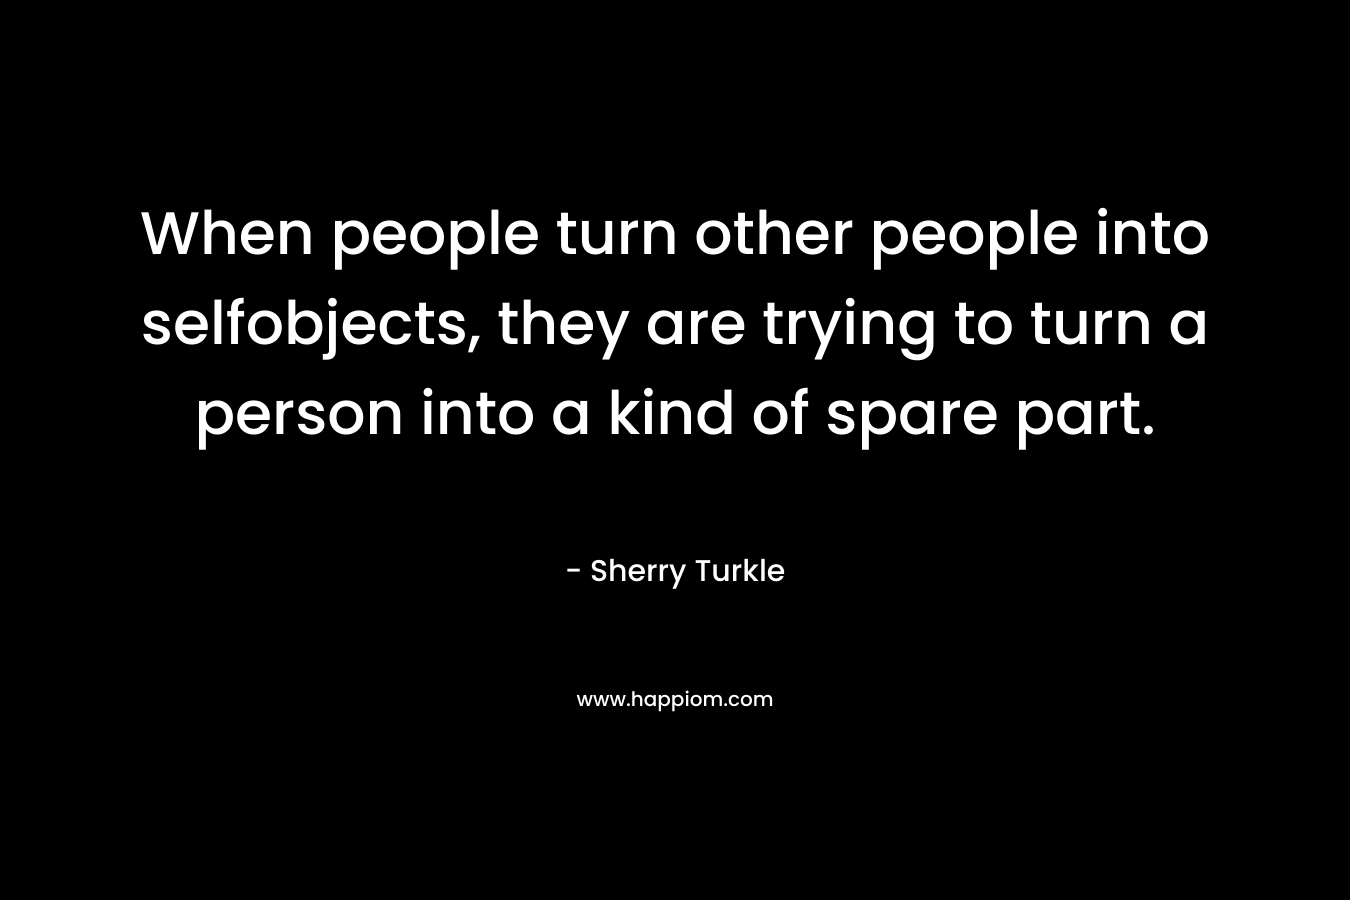 When people turn other people into selfobjects, they are trying to turn a person into a kind of spare part. – Sherry Turkle